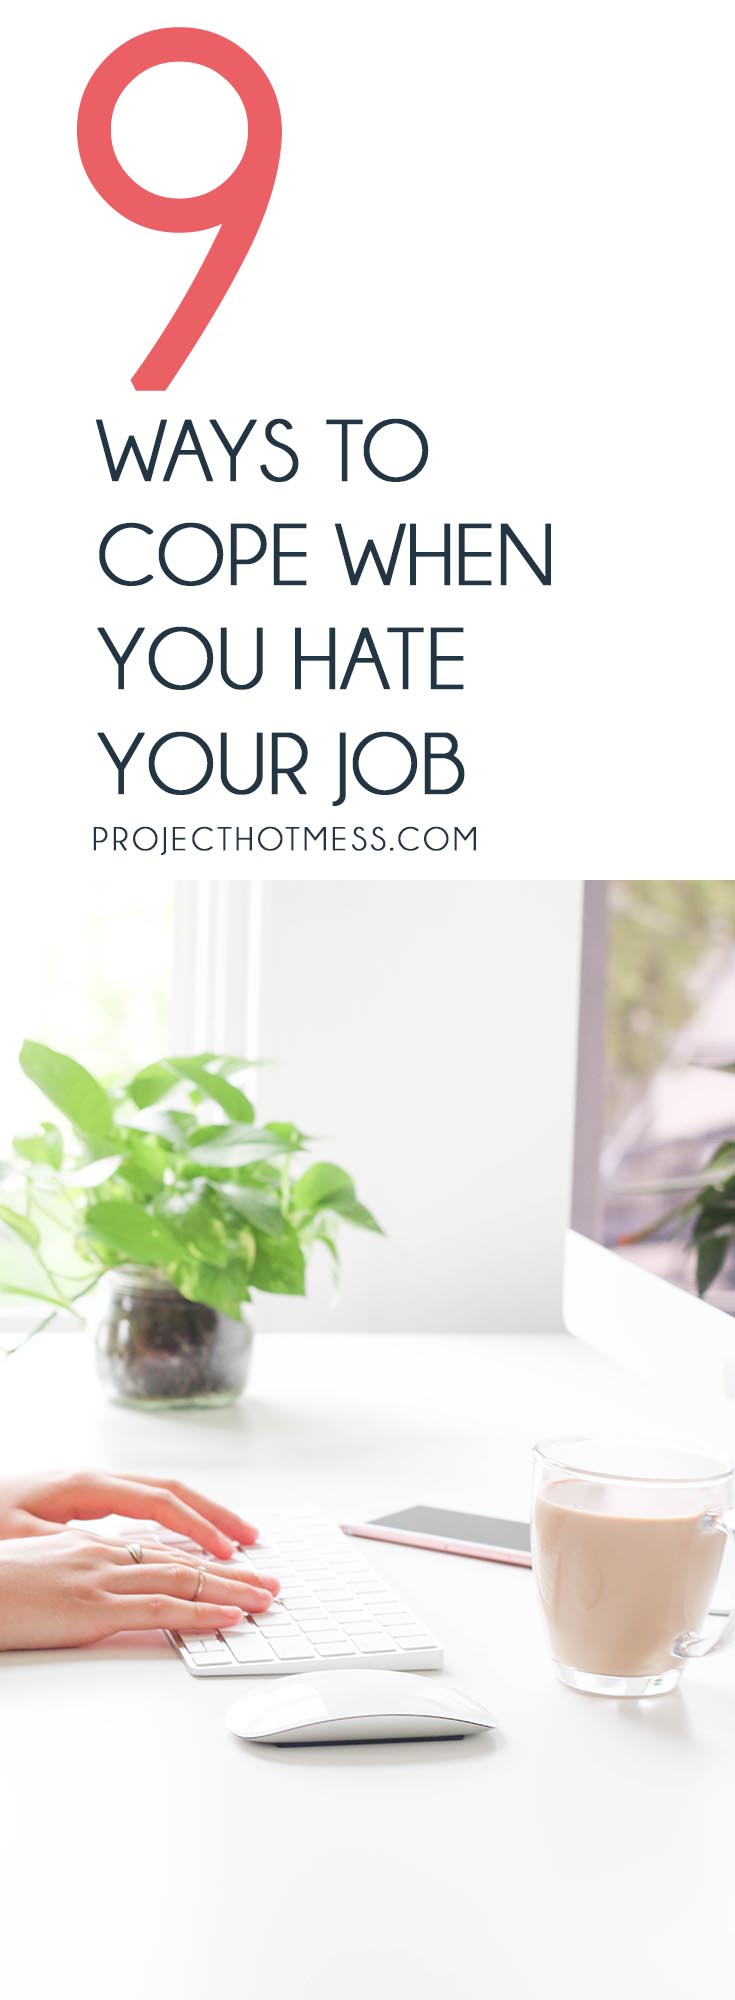 Life can be difficult when you hate your job, the days seem longer and the stress piles on. But there are ways to cope to get you through the bad days, give you a way out of your job or even get you loving your job again!